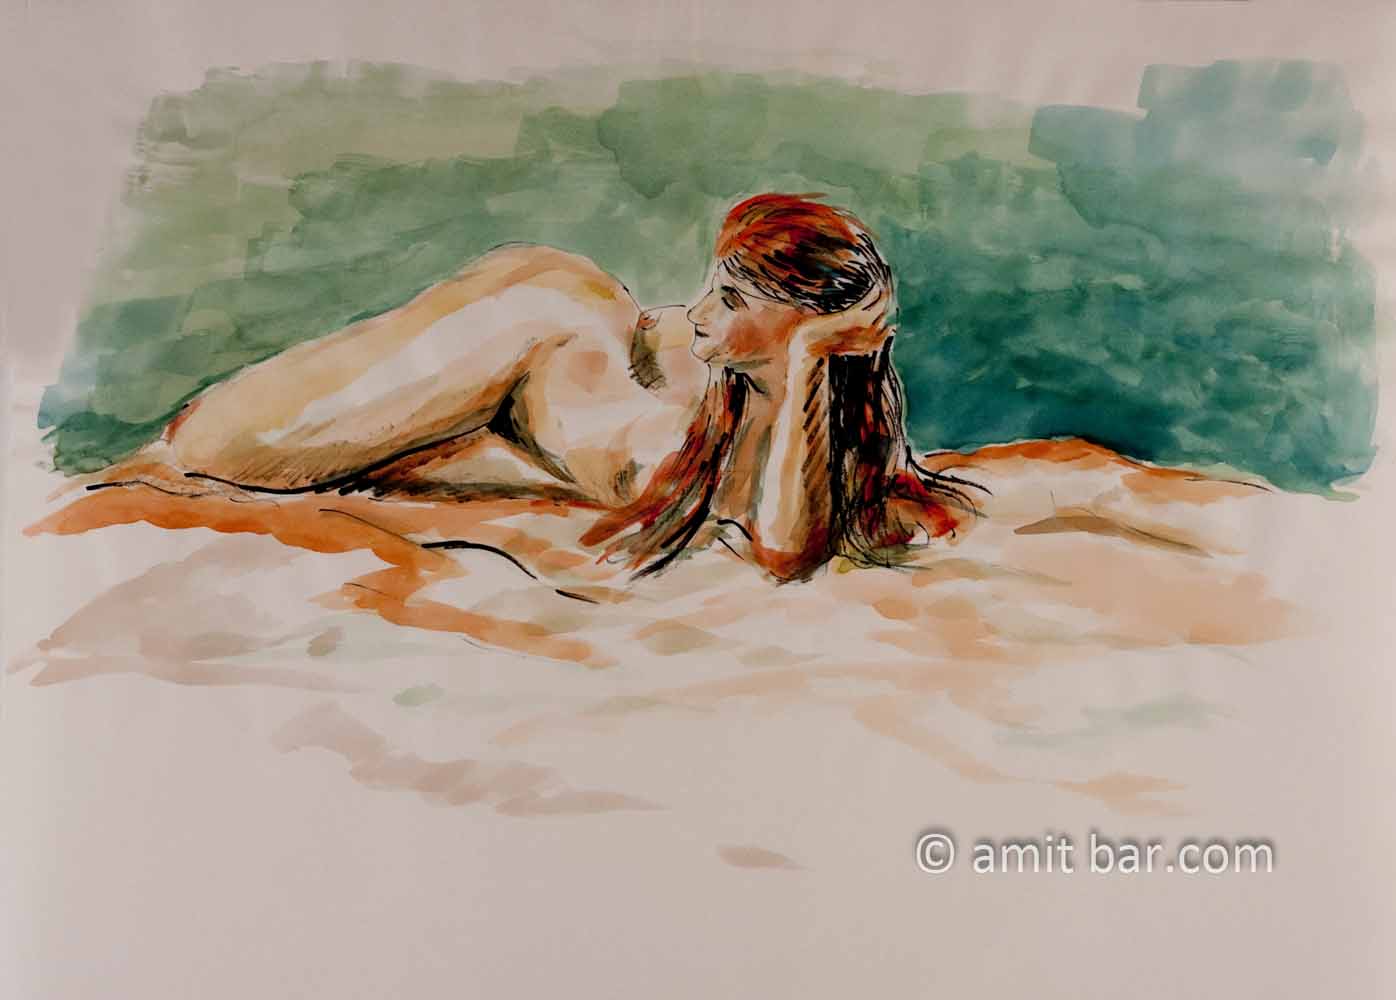 Reddish woman with green background. Ink and aquarel